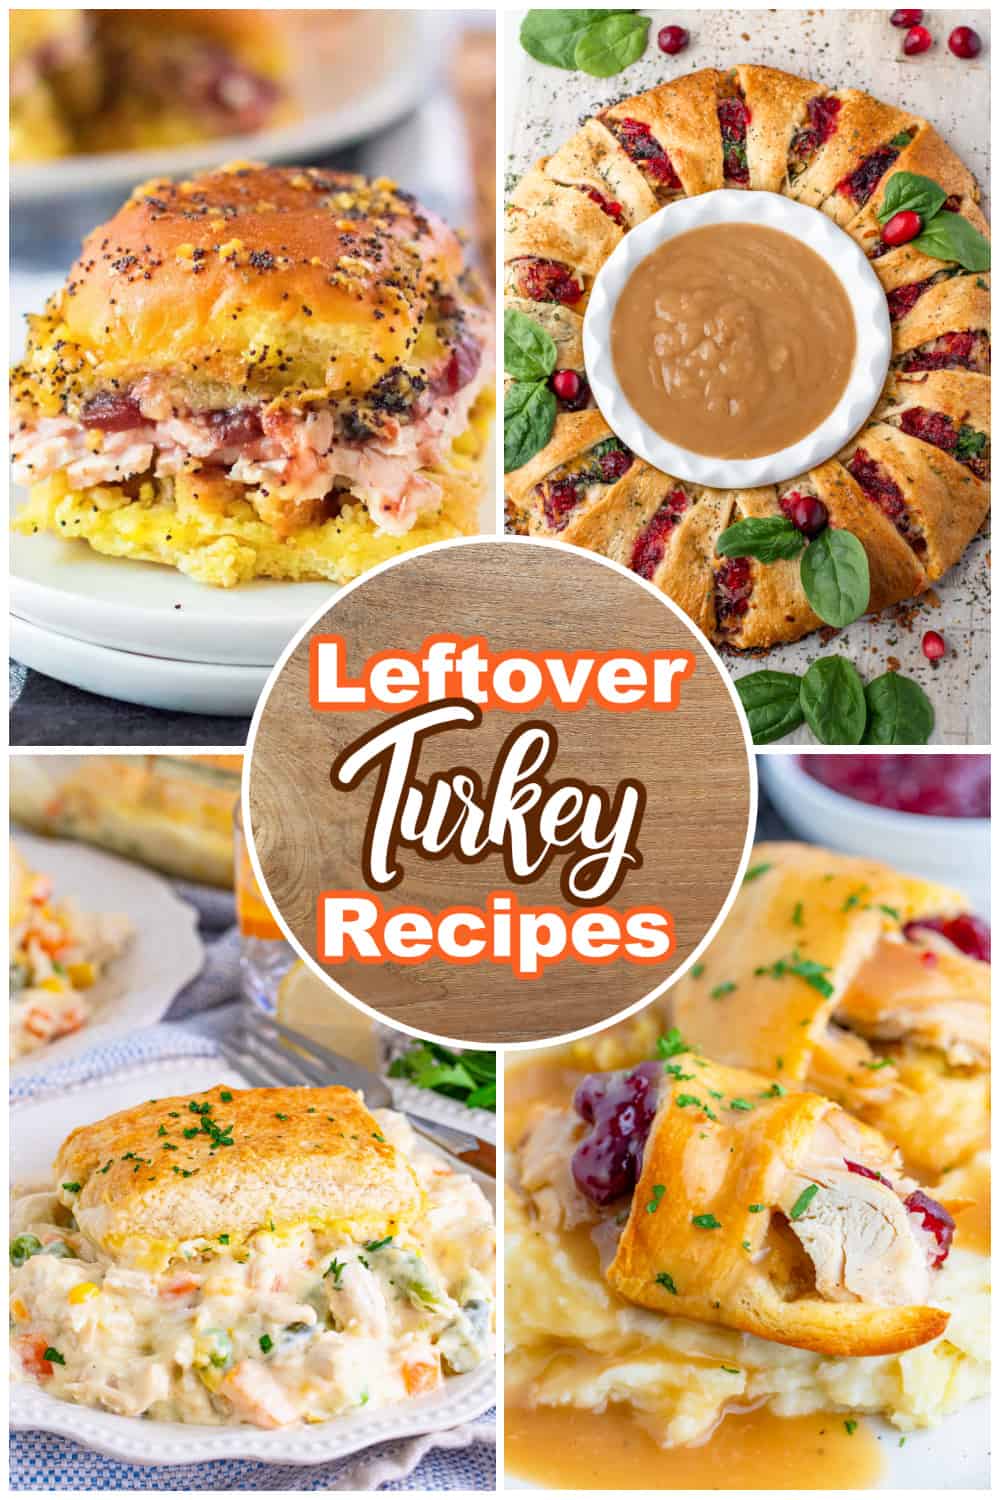 a collage of 4 photos showing leftover thanksgiving recipes and text in the center that reads "Leftover Turkey Recipes."